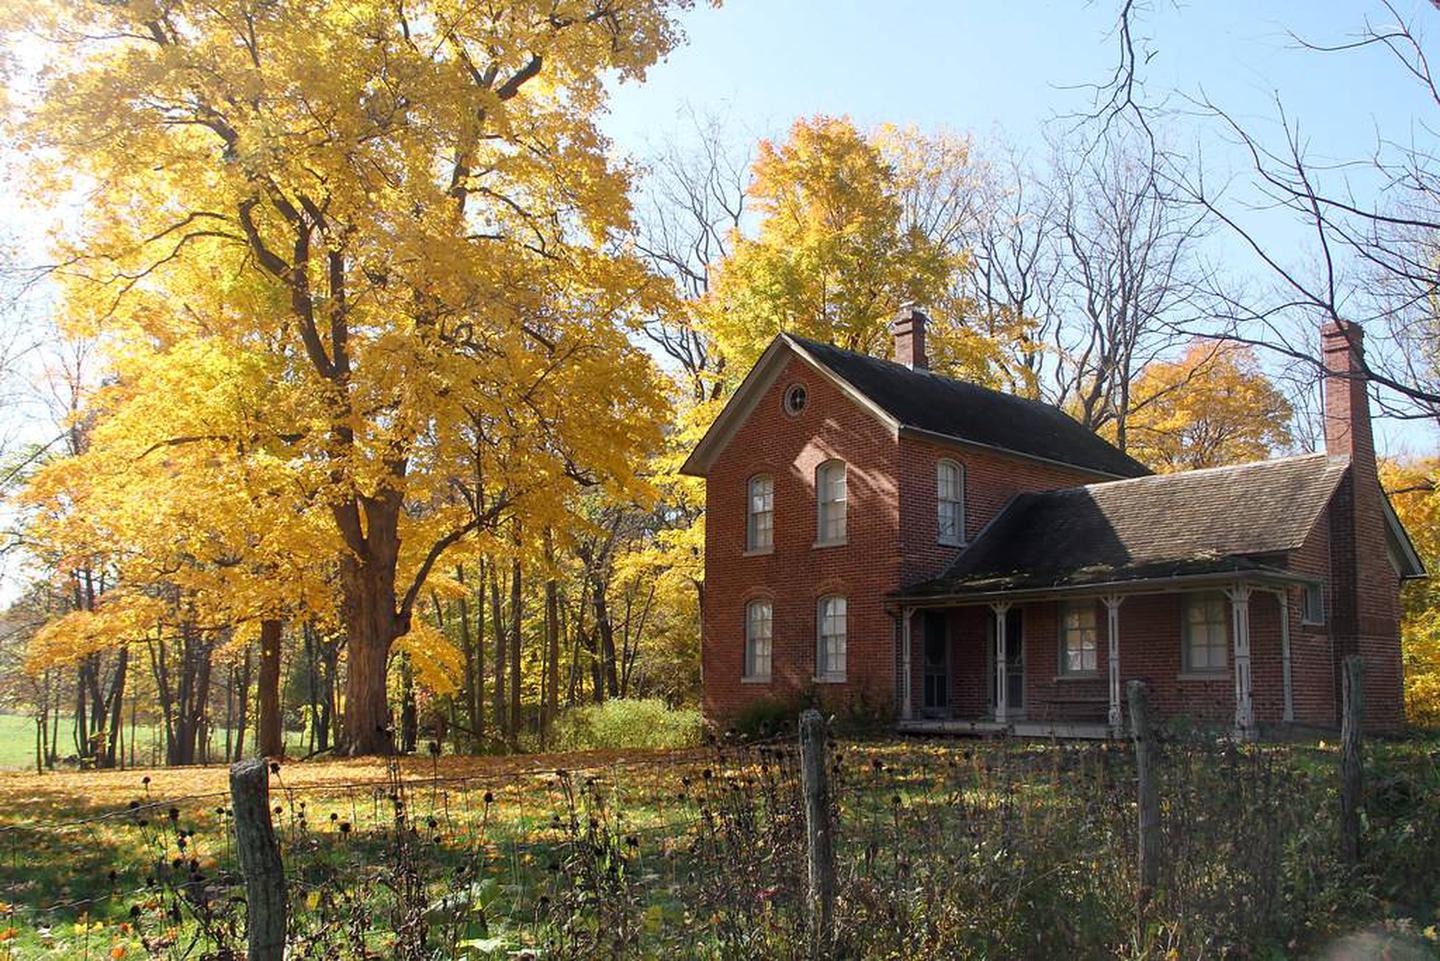 Chellberg Farmhouse in the fall in Indiana Dunes National Park.